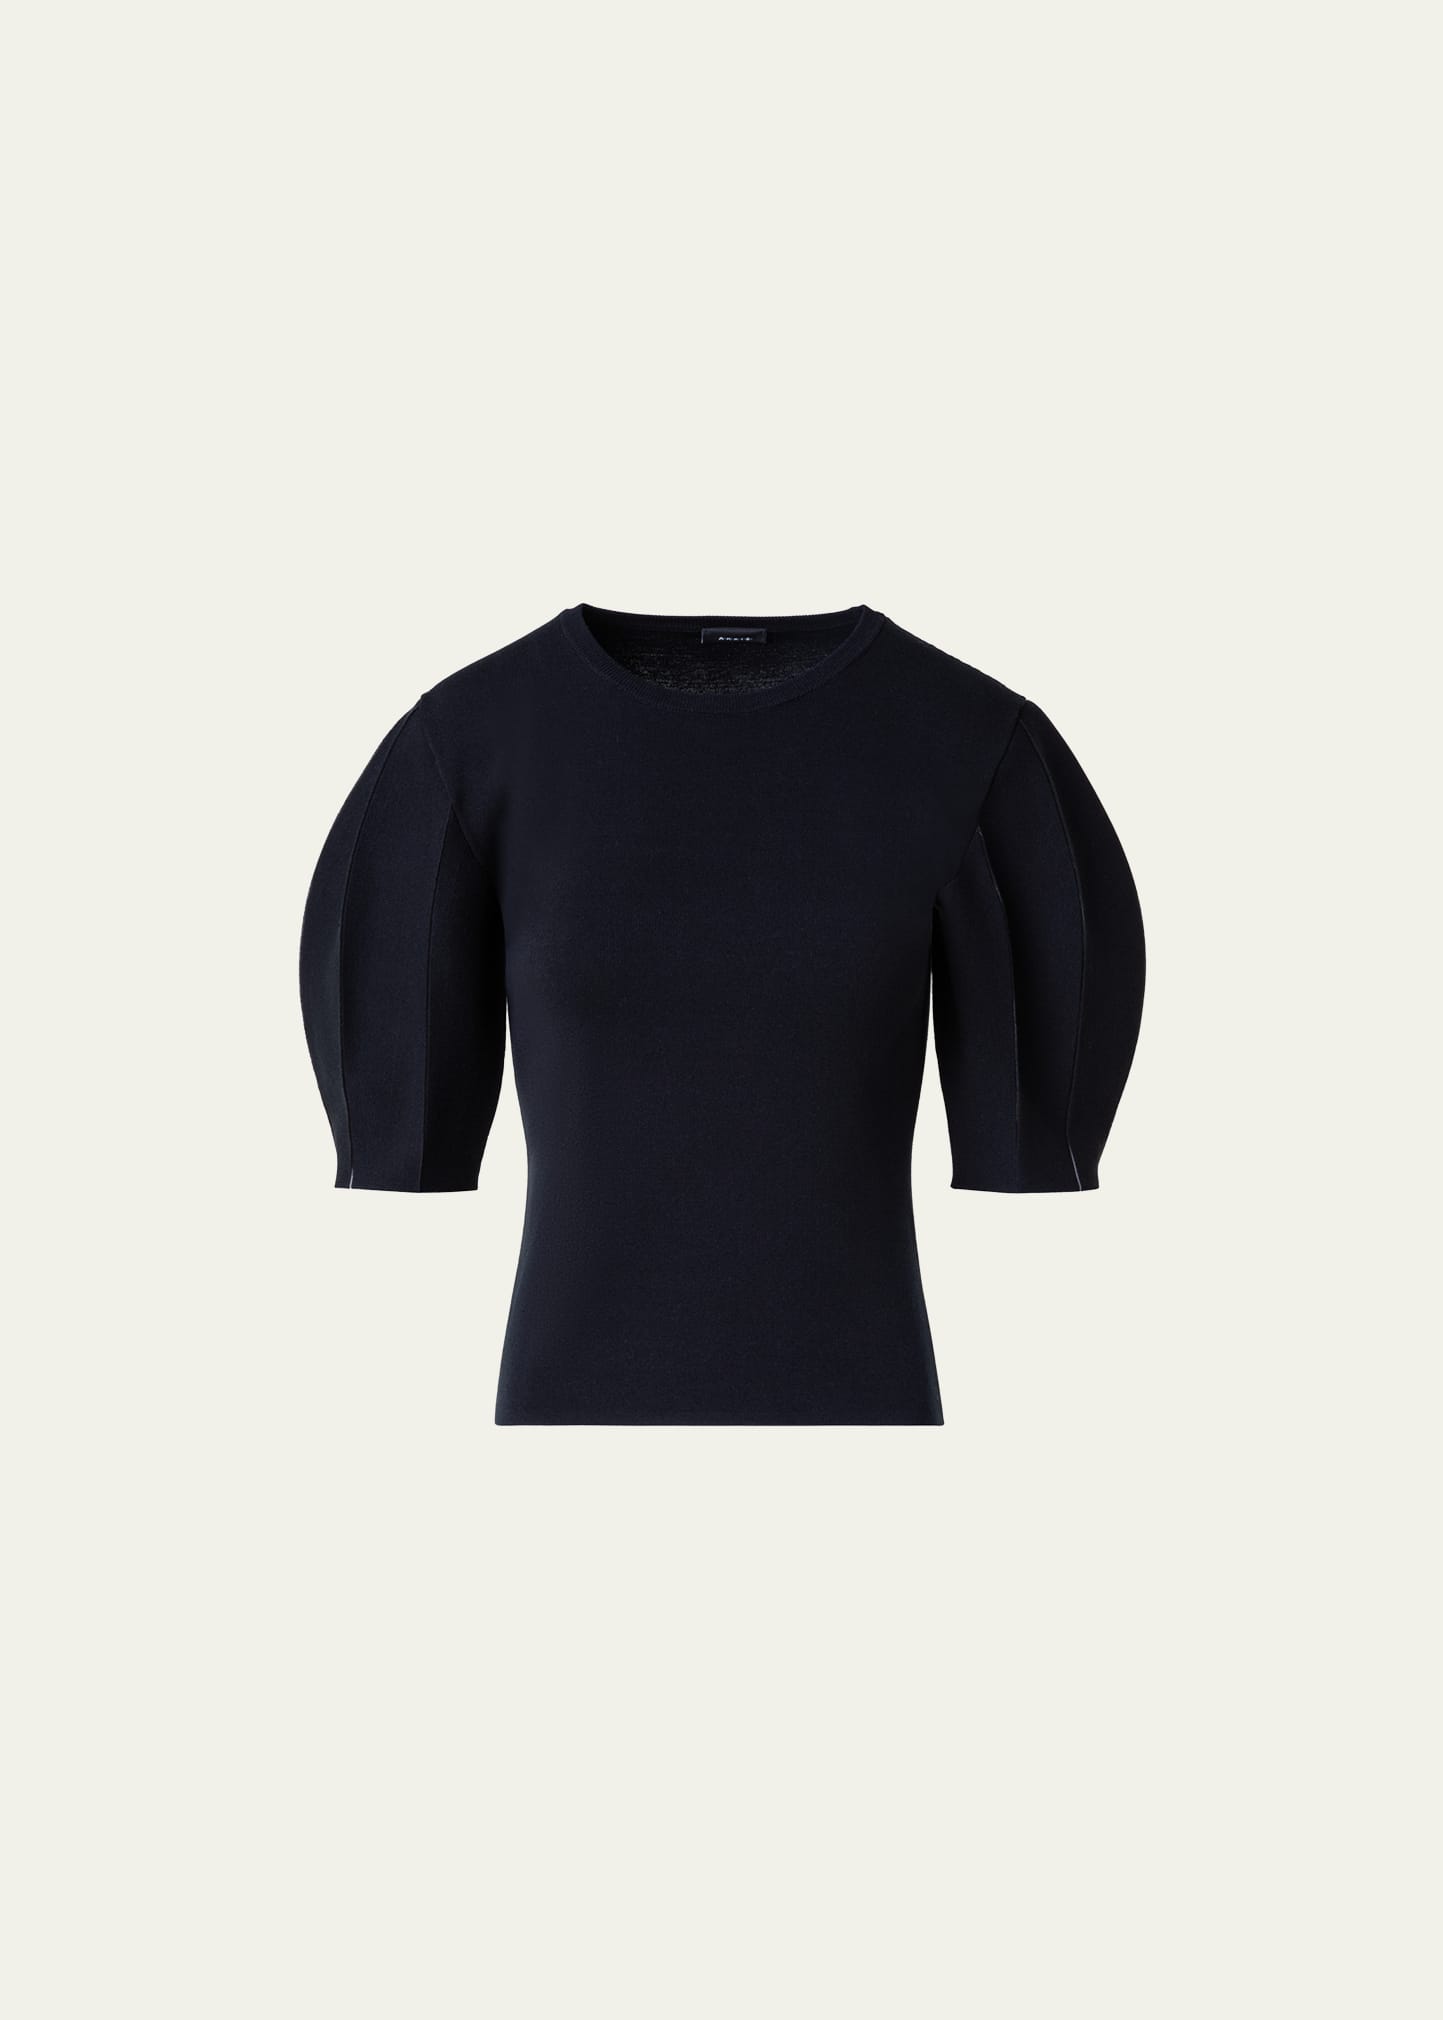 Akris Silk Cotton Knit With Volume Puff Sleeves In Black